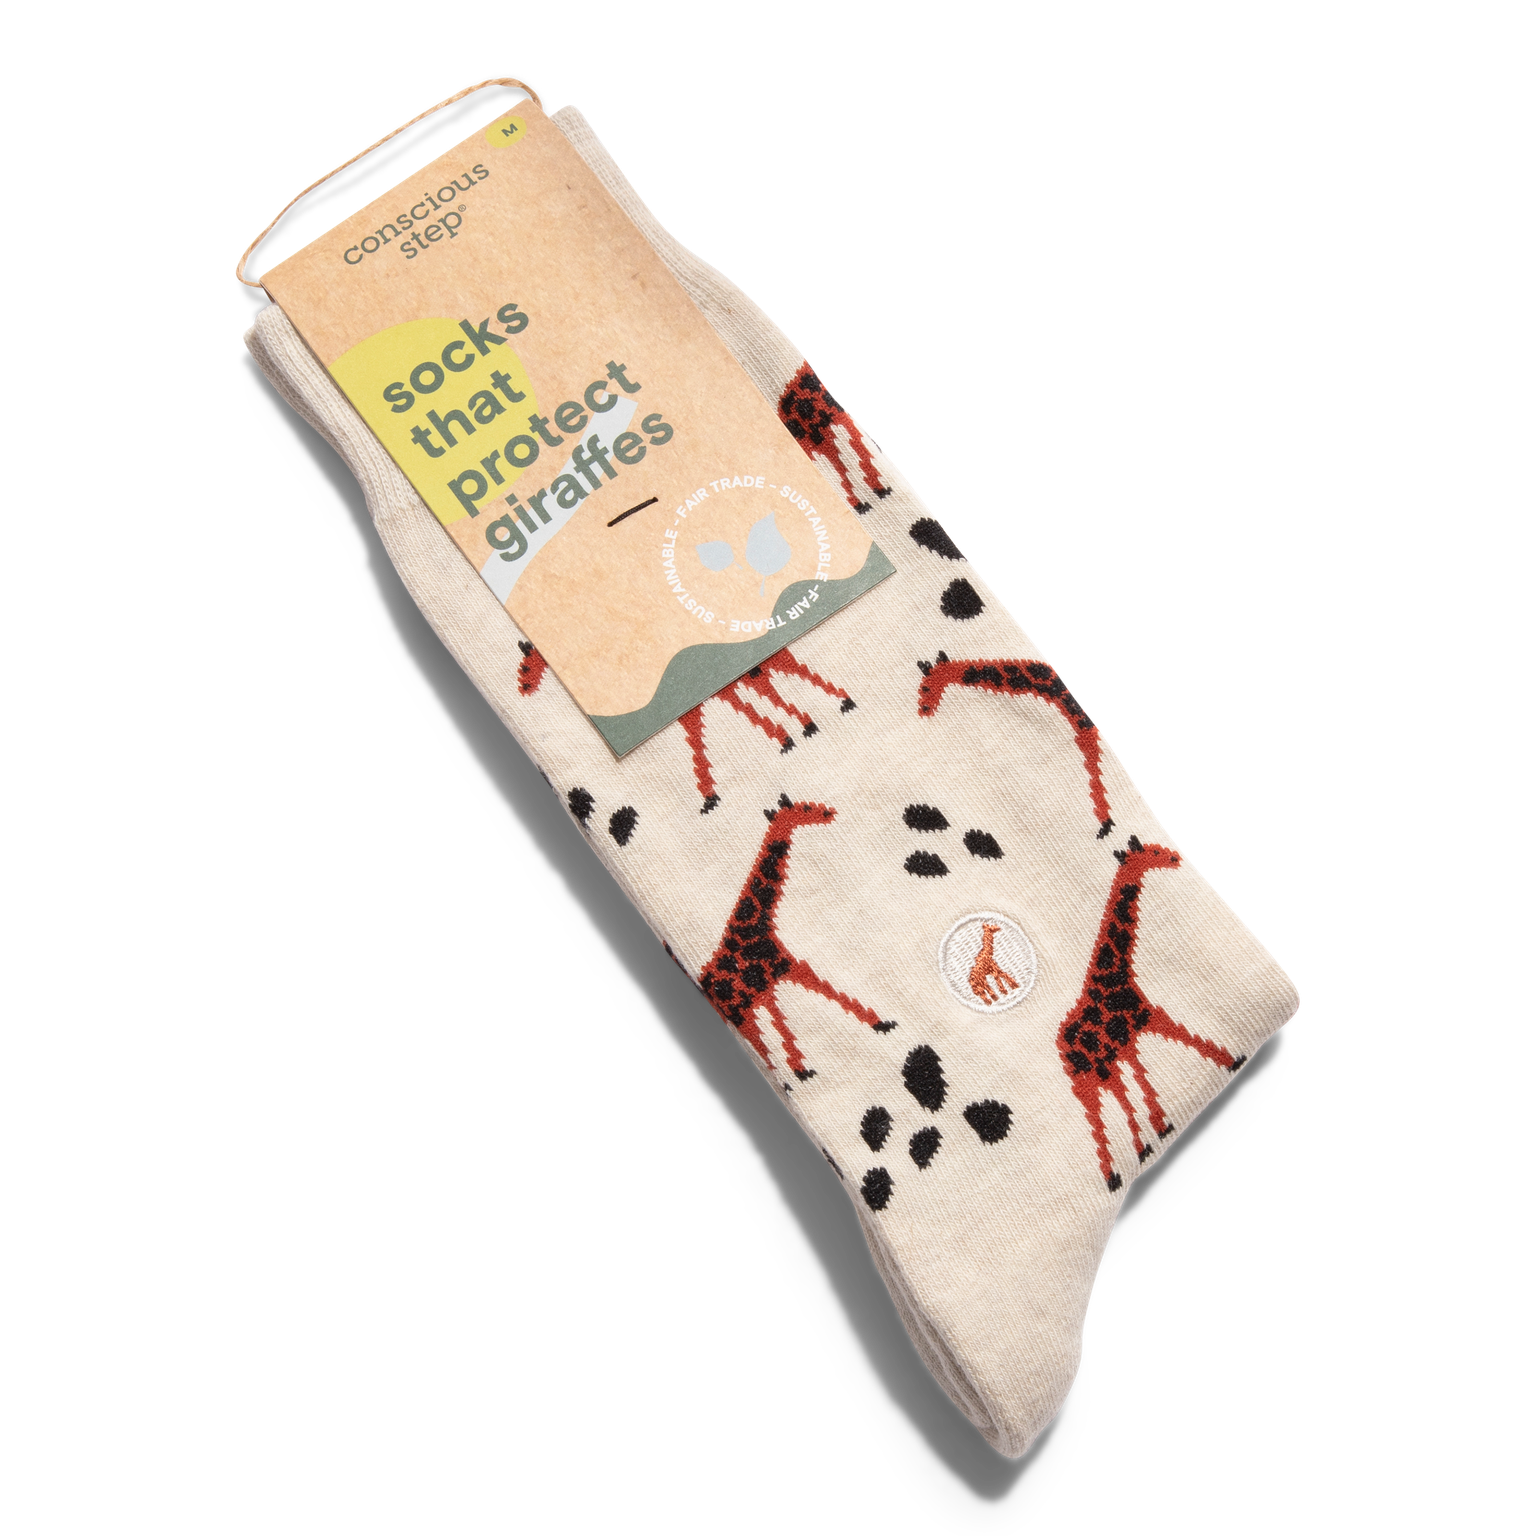 Conscious Step - Socks that Protect Giraffes  Conscious Step   -better made easy-eco-friendly-sustainable-gifting